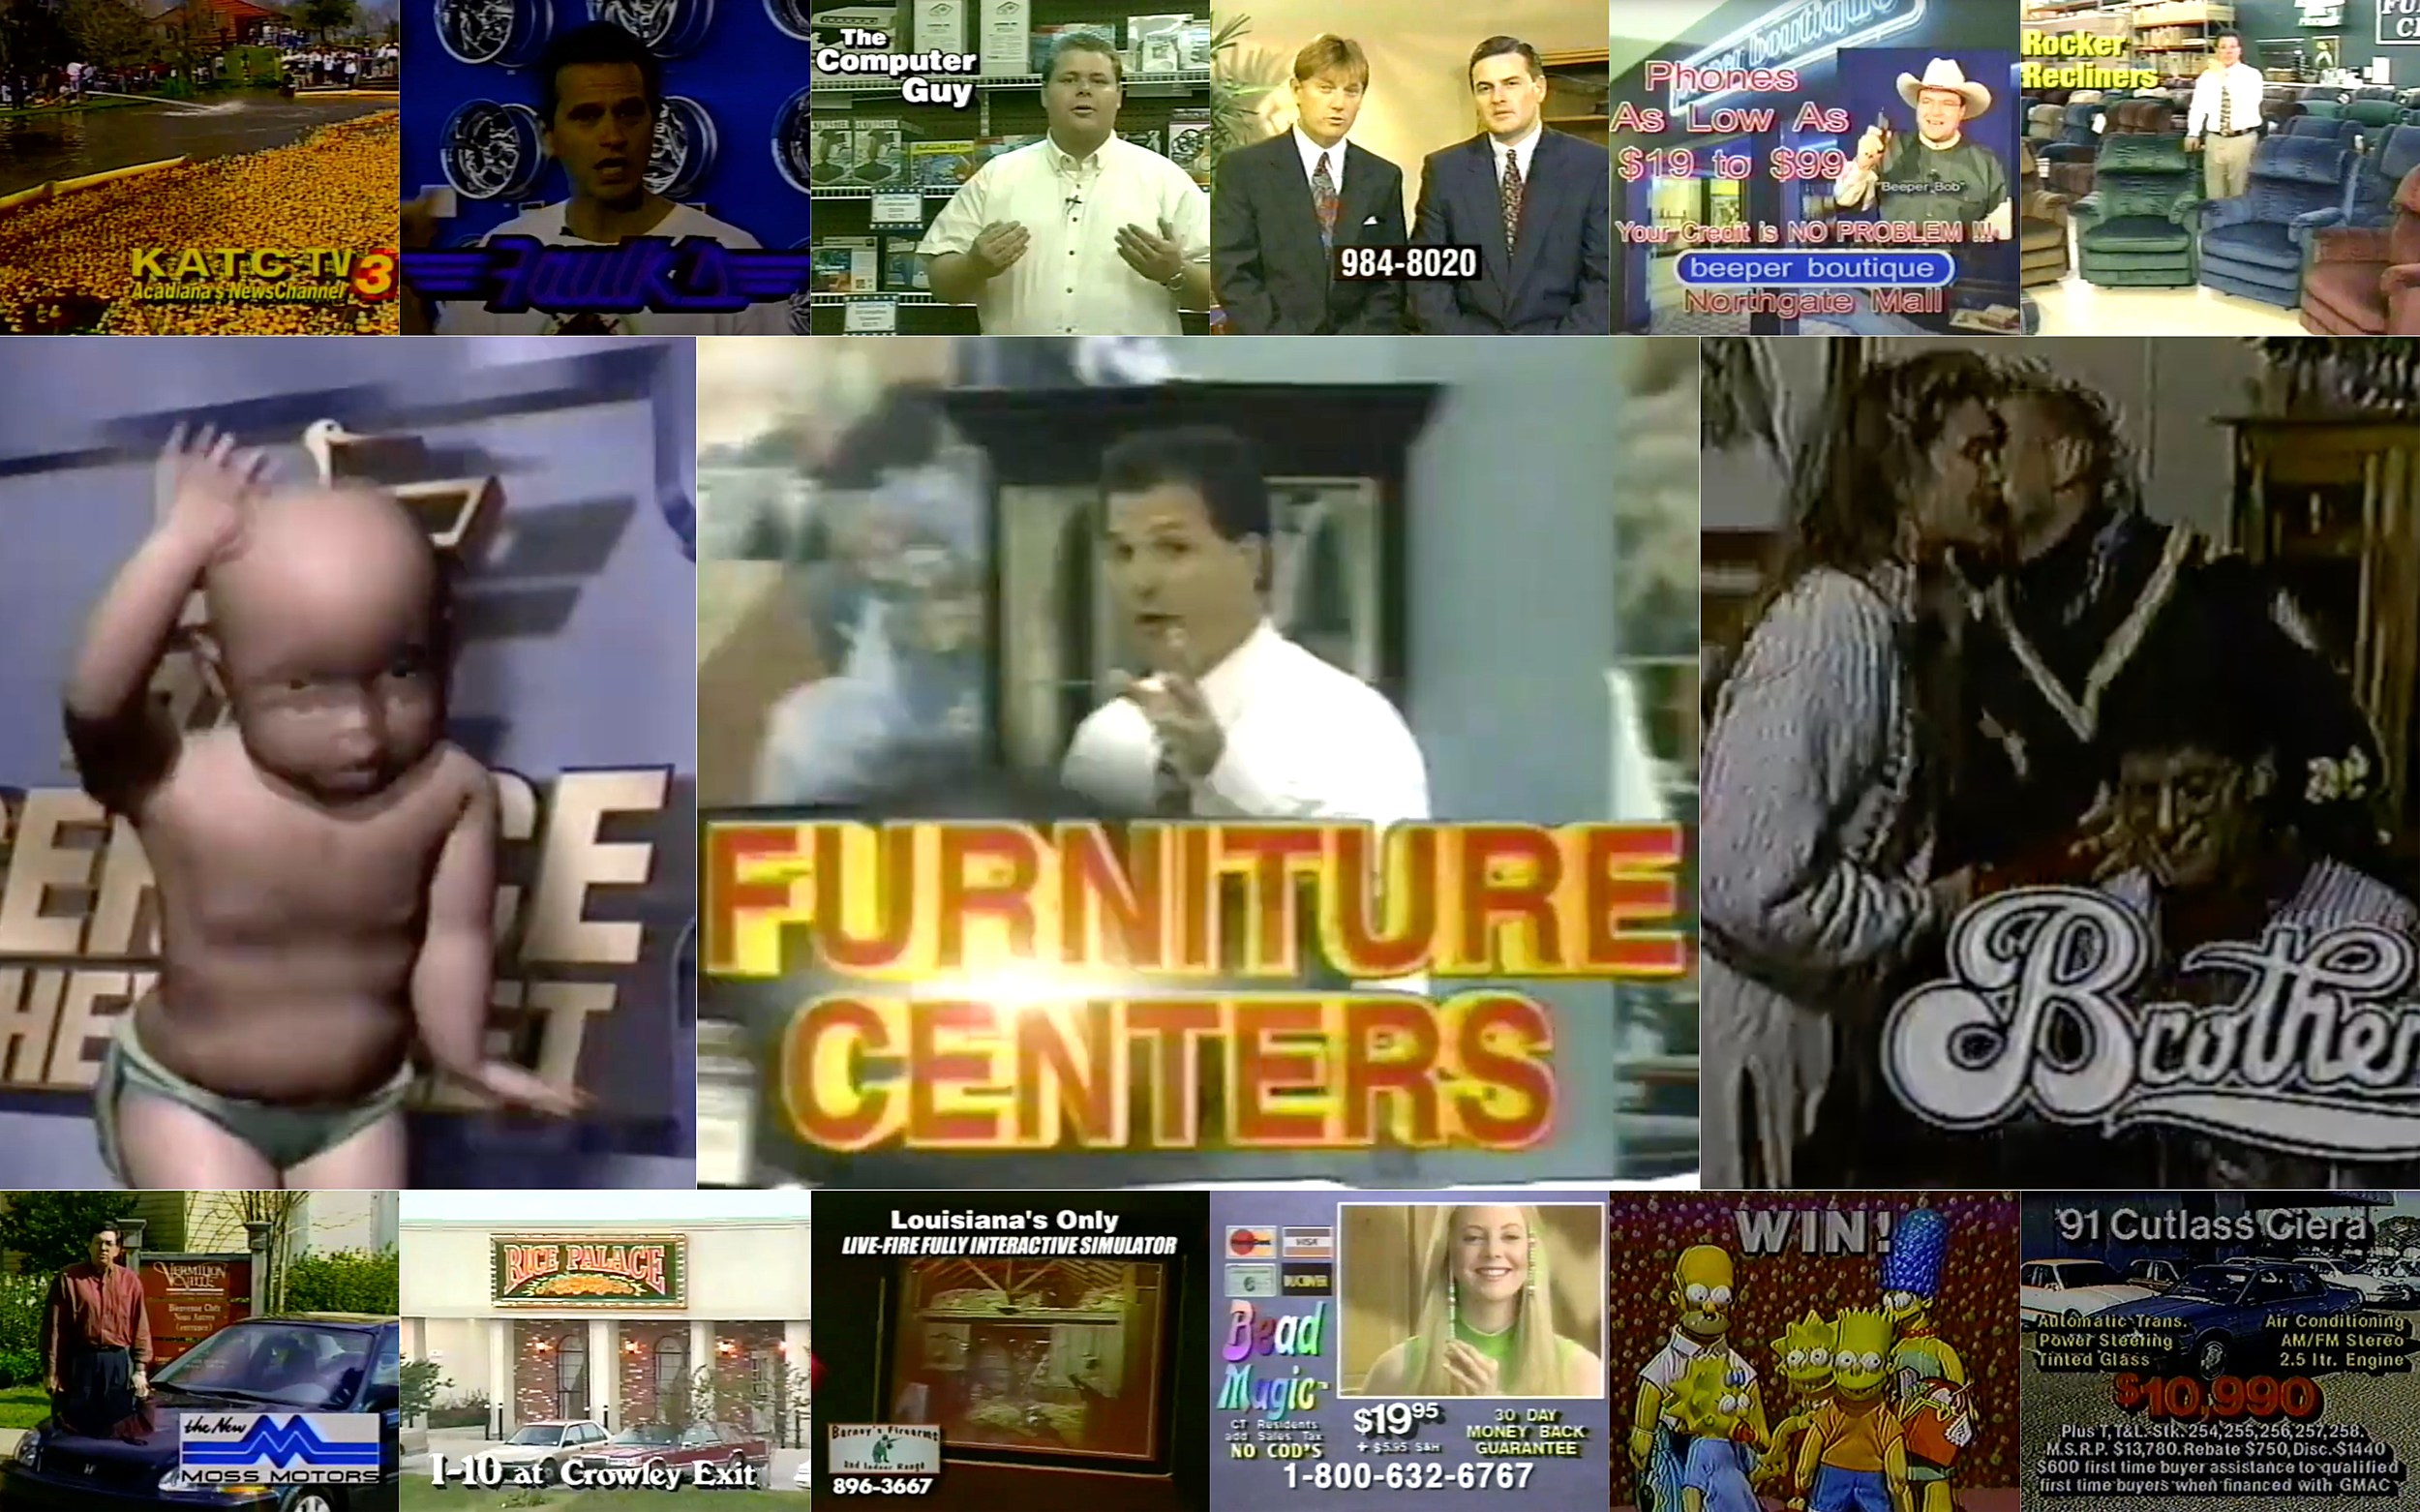 Local Lafayette TV Commercials from the Early & Late '90s